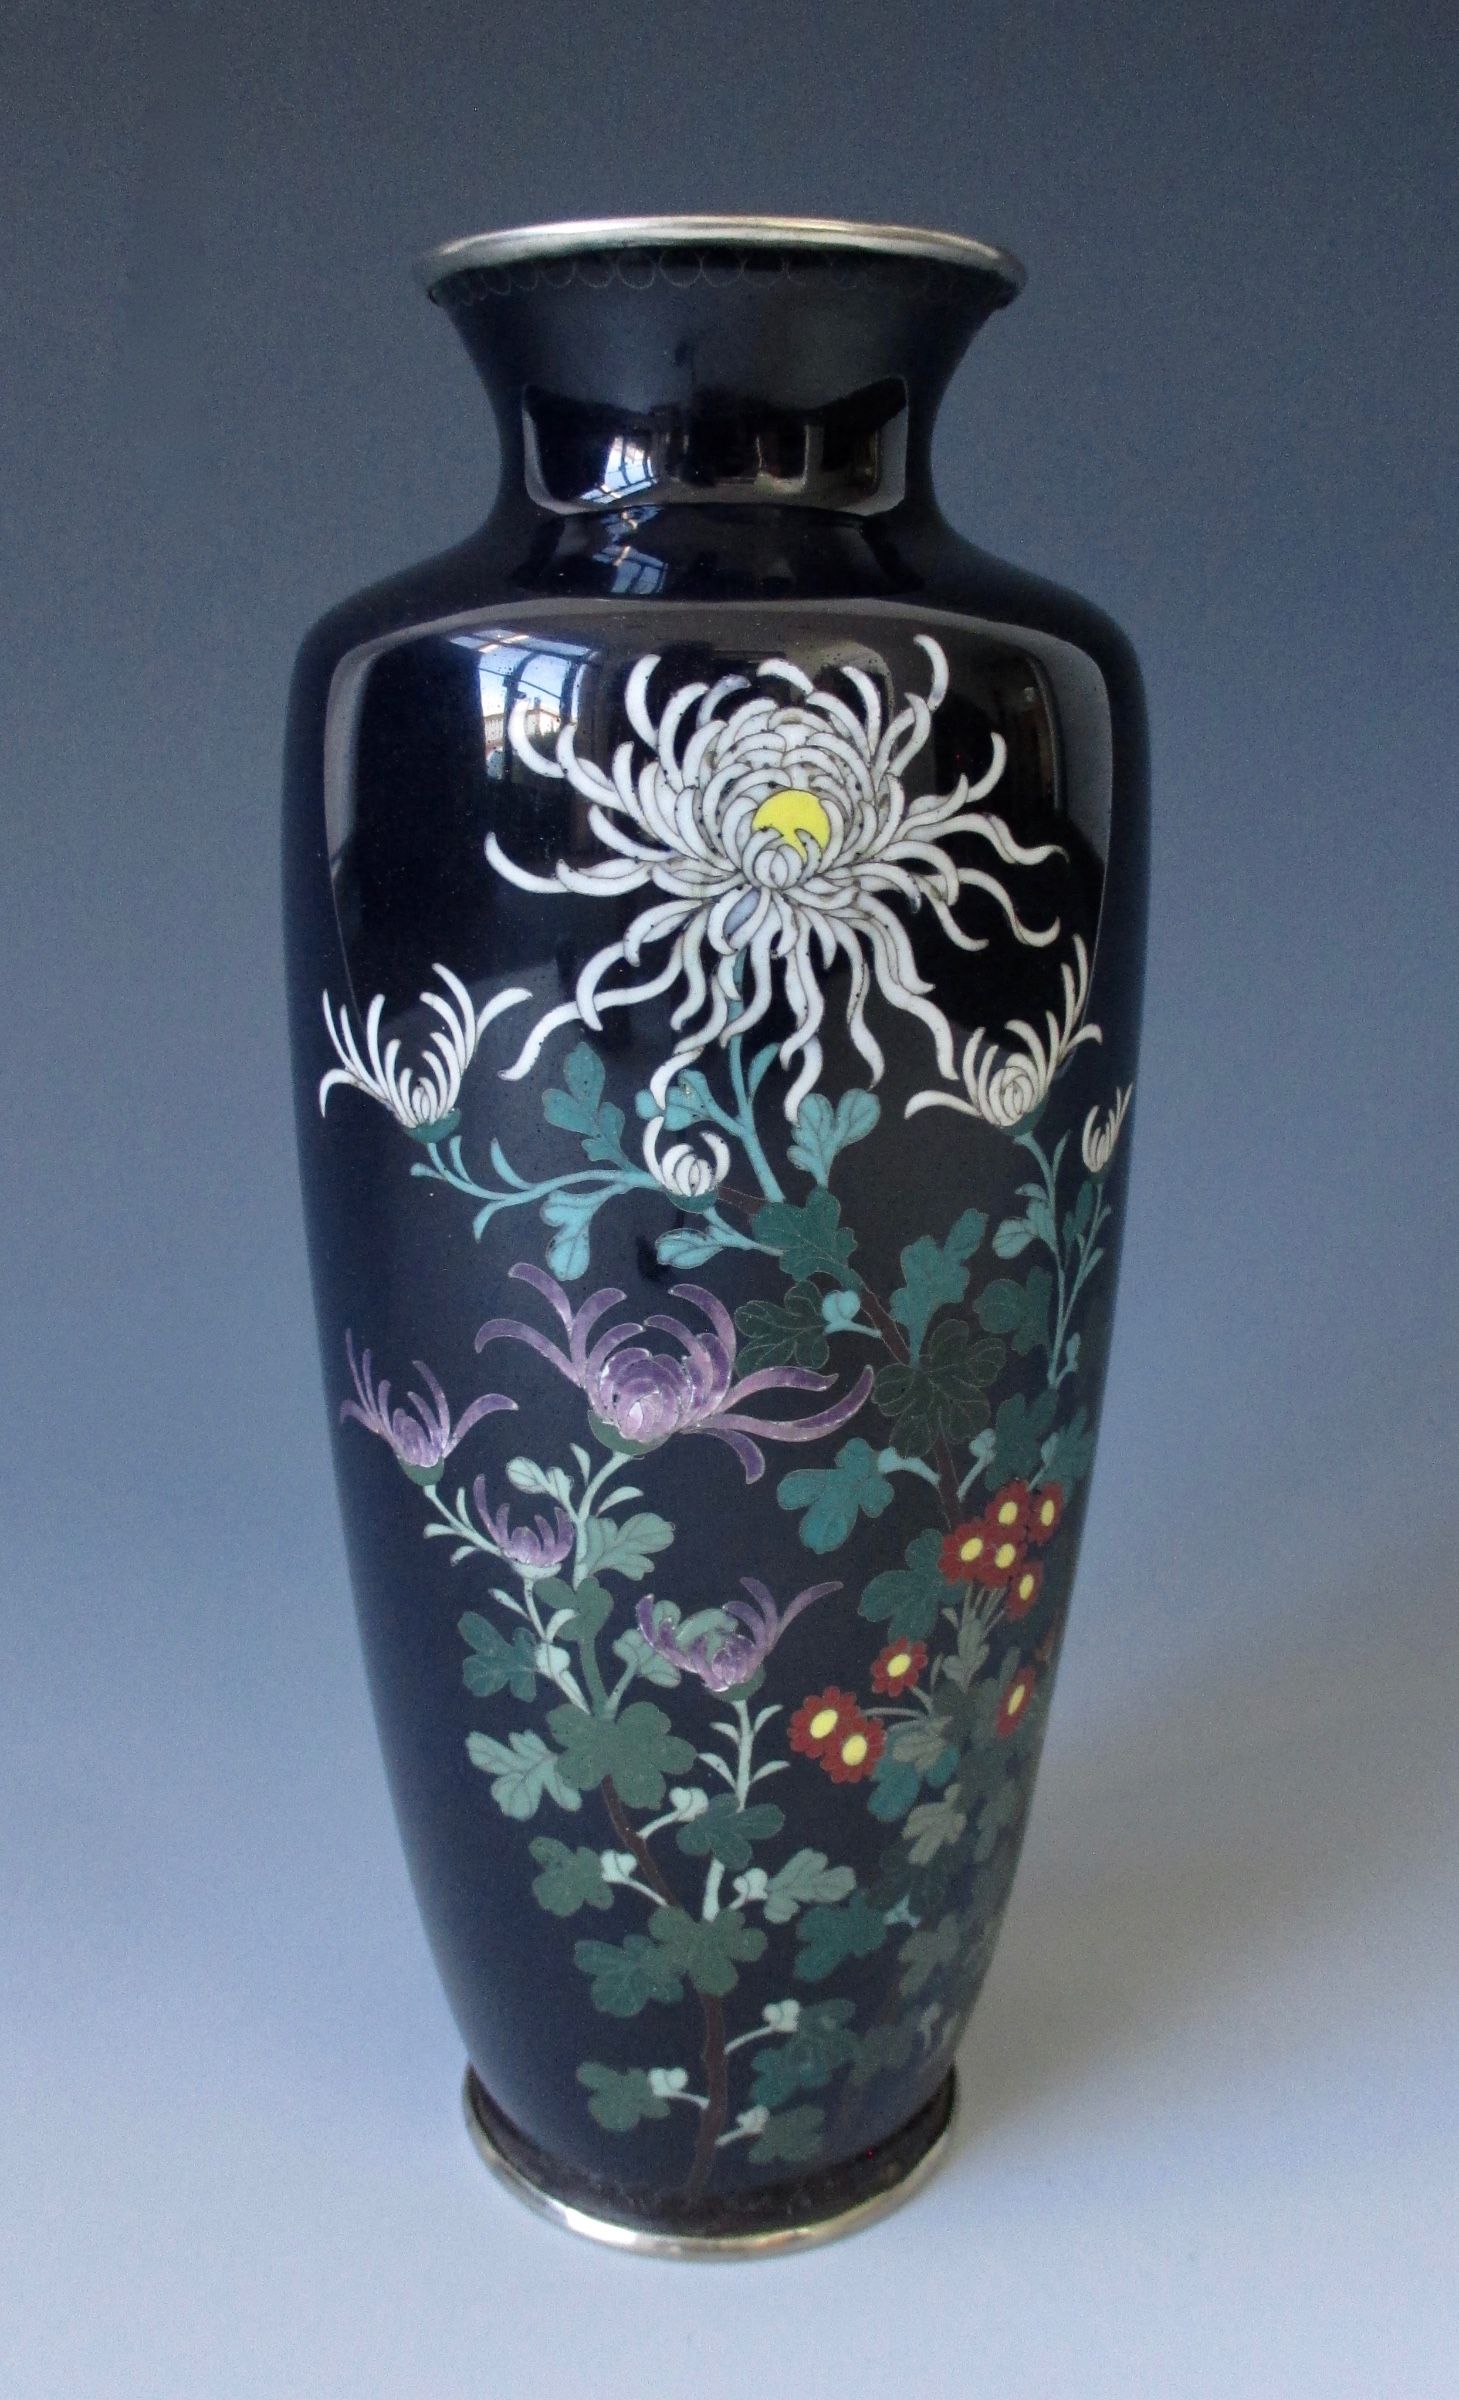 Japanese Antique Cloisonné Vase with Chrysanthemums - Zentner Collection